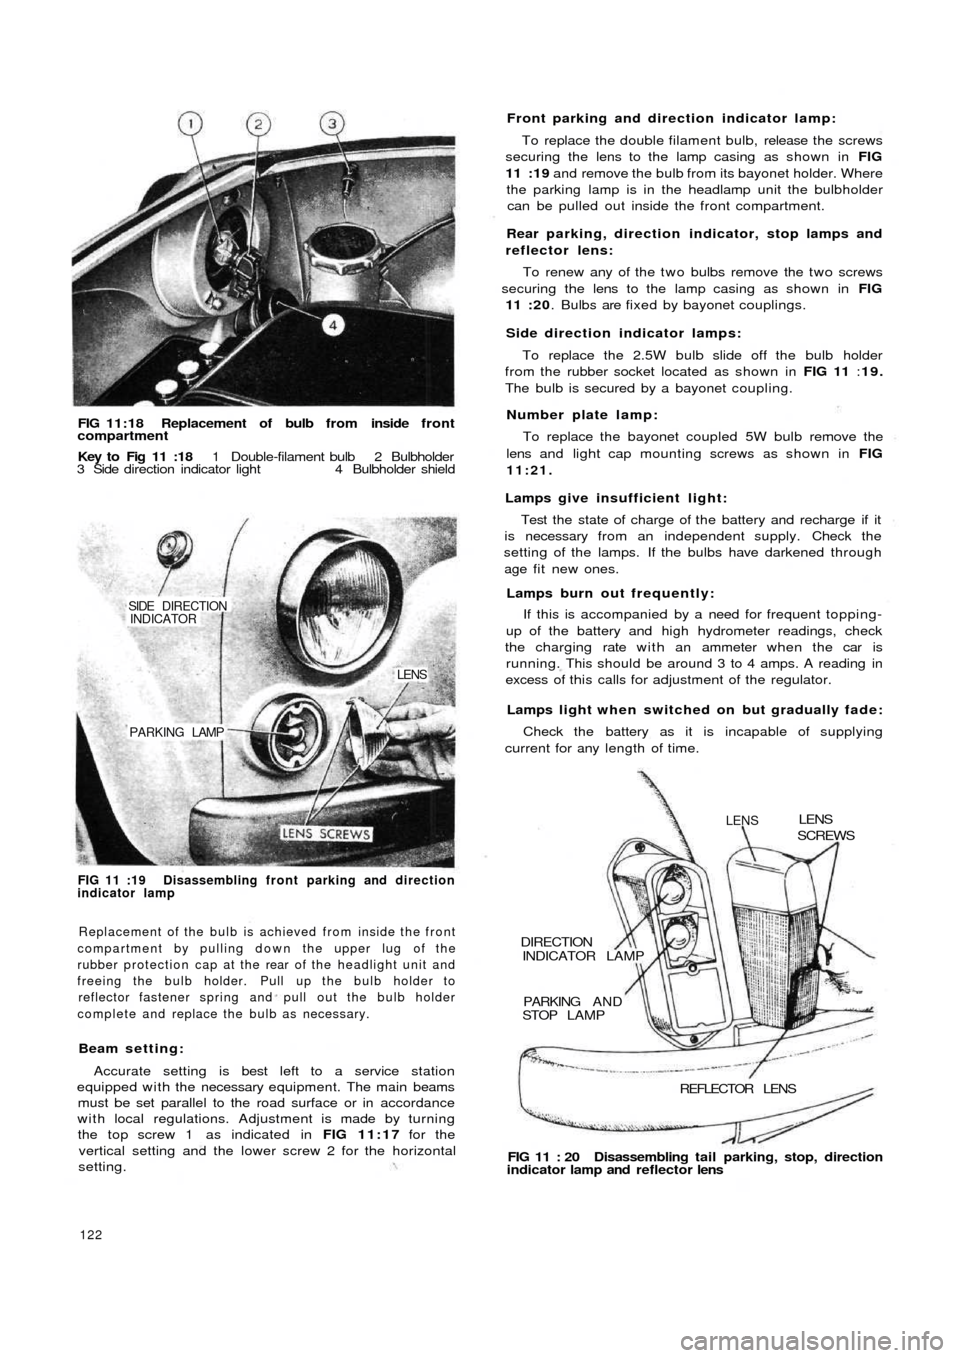 FIAT 500 1969 1.G Workshop Manual FIG 11:18 Replacement of bulb from inside f r o n tcompartment
Key to  Fig 11 :18 1 Double-filament bulb 2 Bulbholder
3 Side direction indicator light 4 Bulbholder shield
PARKING LAMP
LENS
SIDE  DIREC